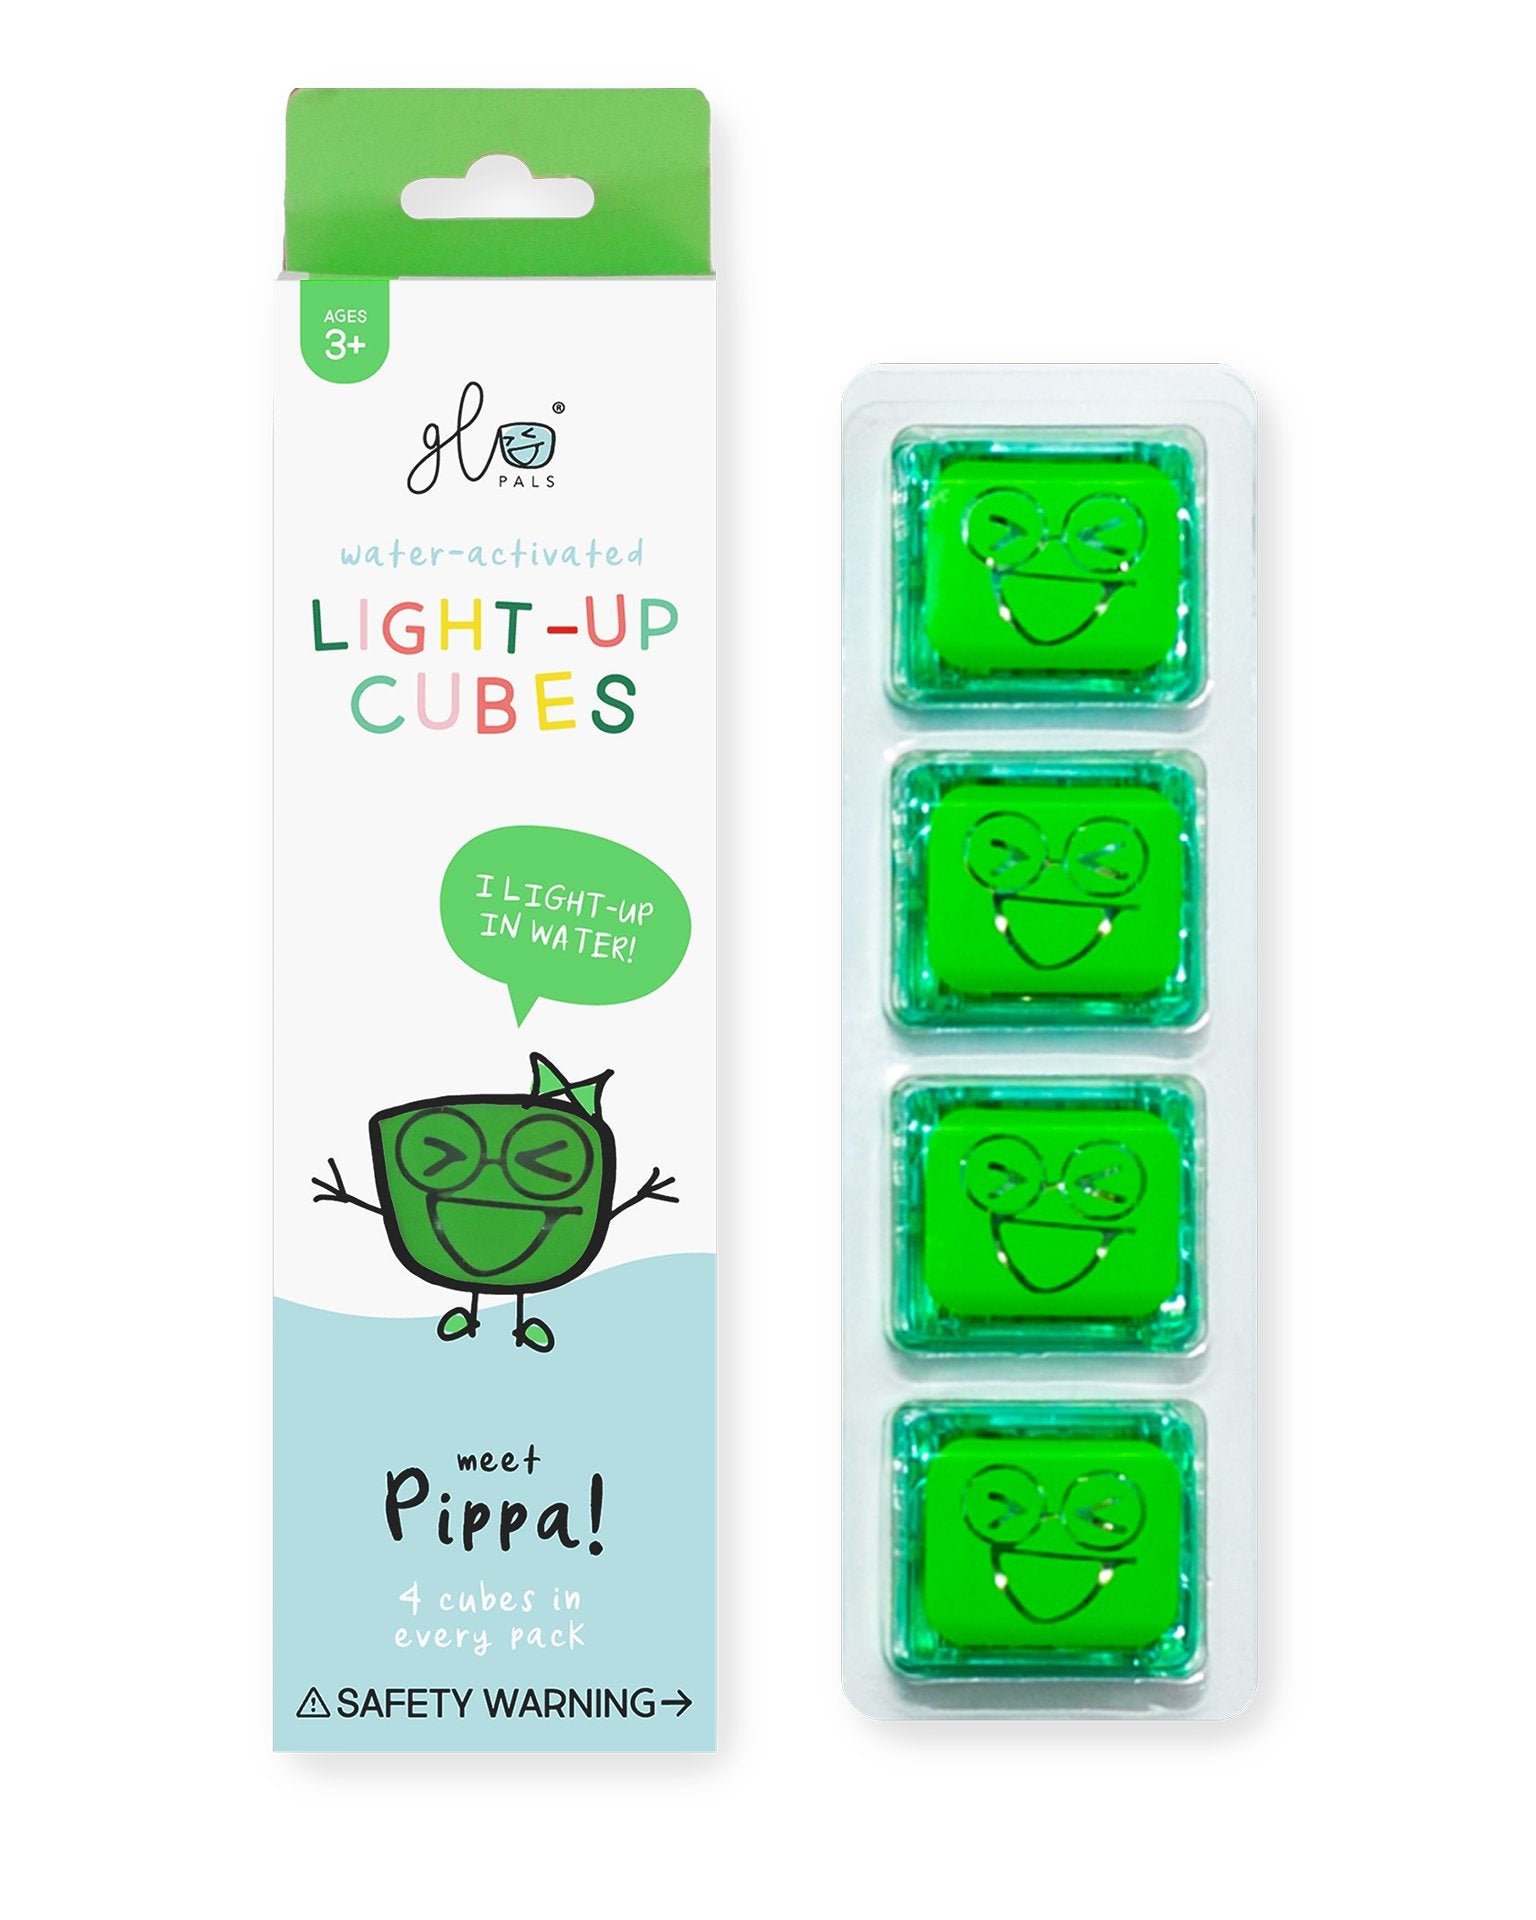 Little glo pals room glo pals green